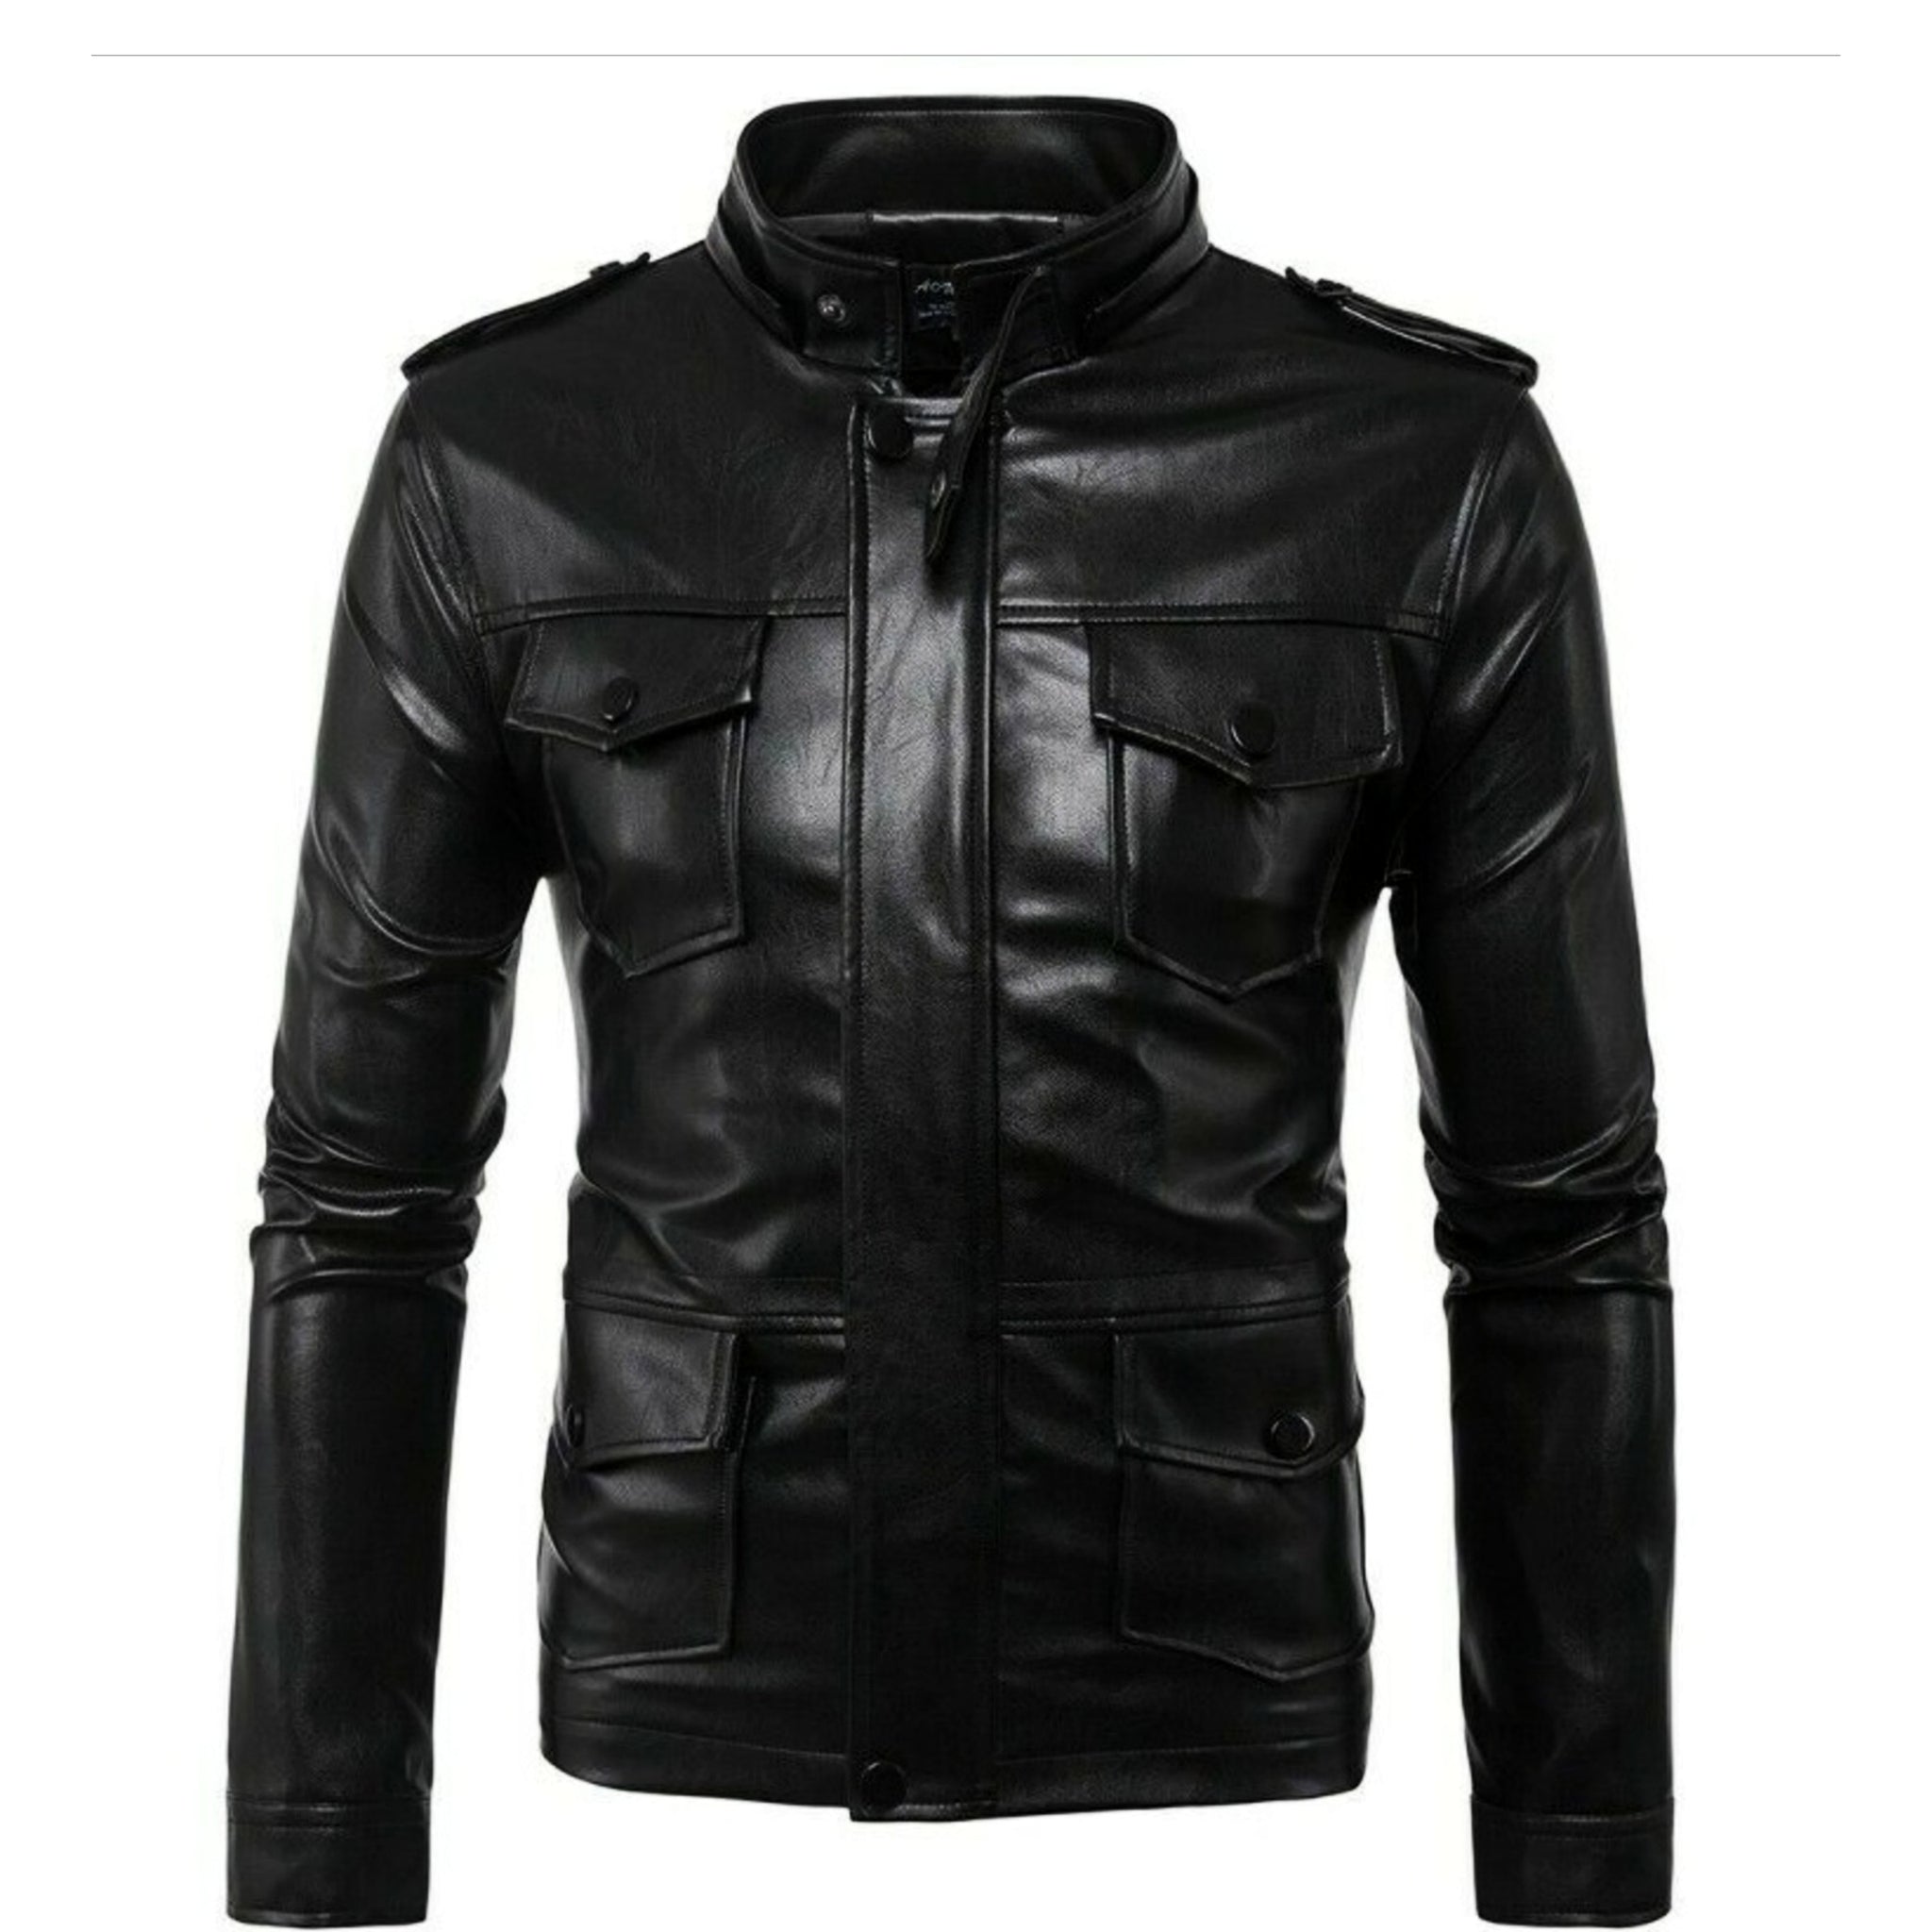 Noora Mens Hooded Leather Jacket Black Fitted Stylish Sports Real Black Color Leather Jacket WA530